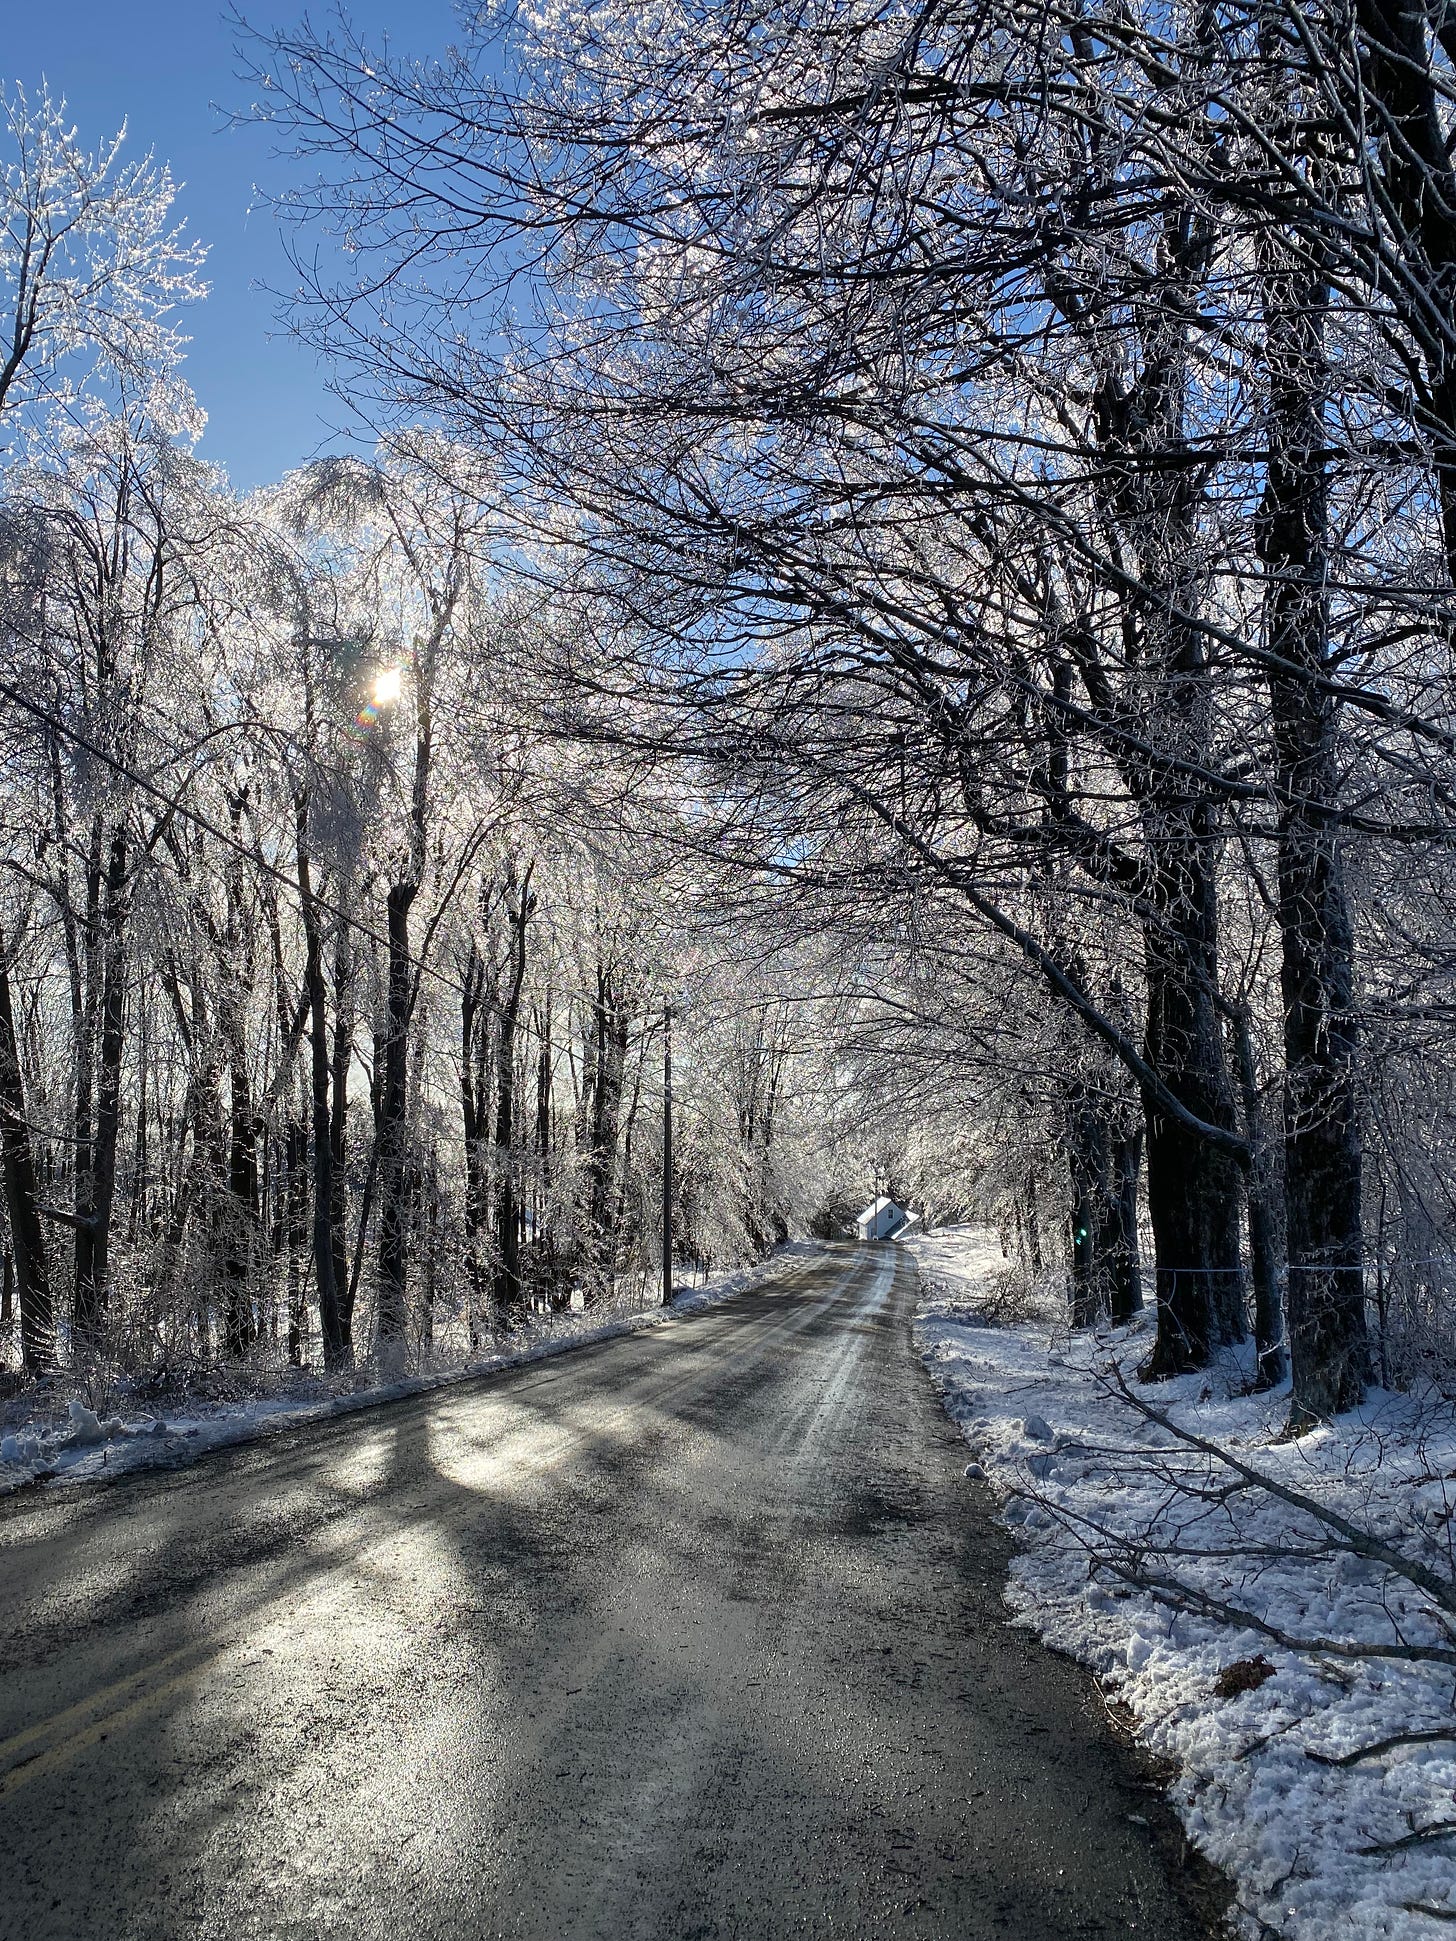 A sunlit road surrounded by sparkling silver trees, their branches covered in glittering ice.